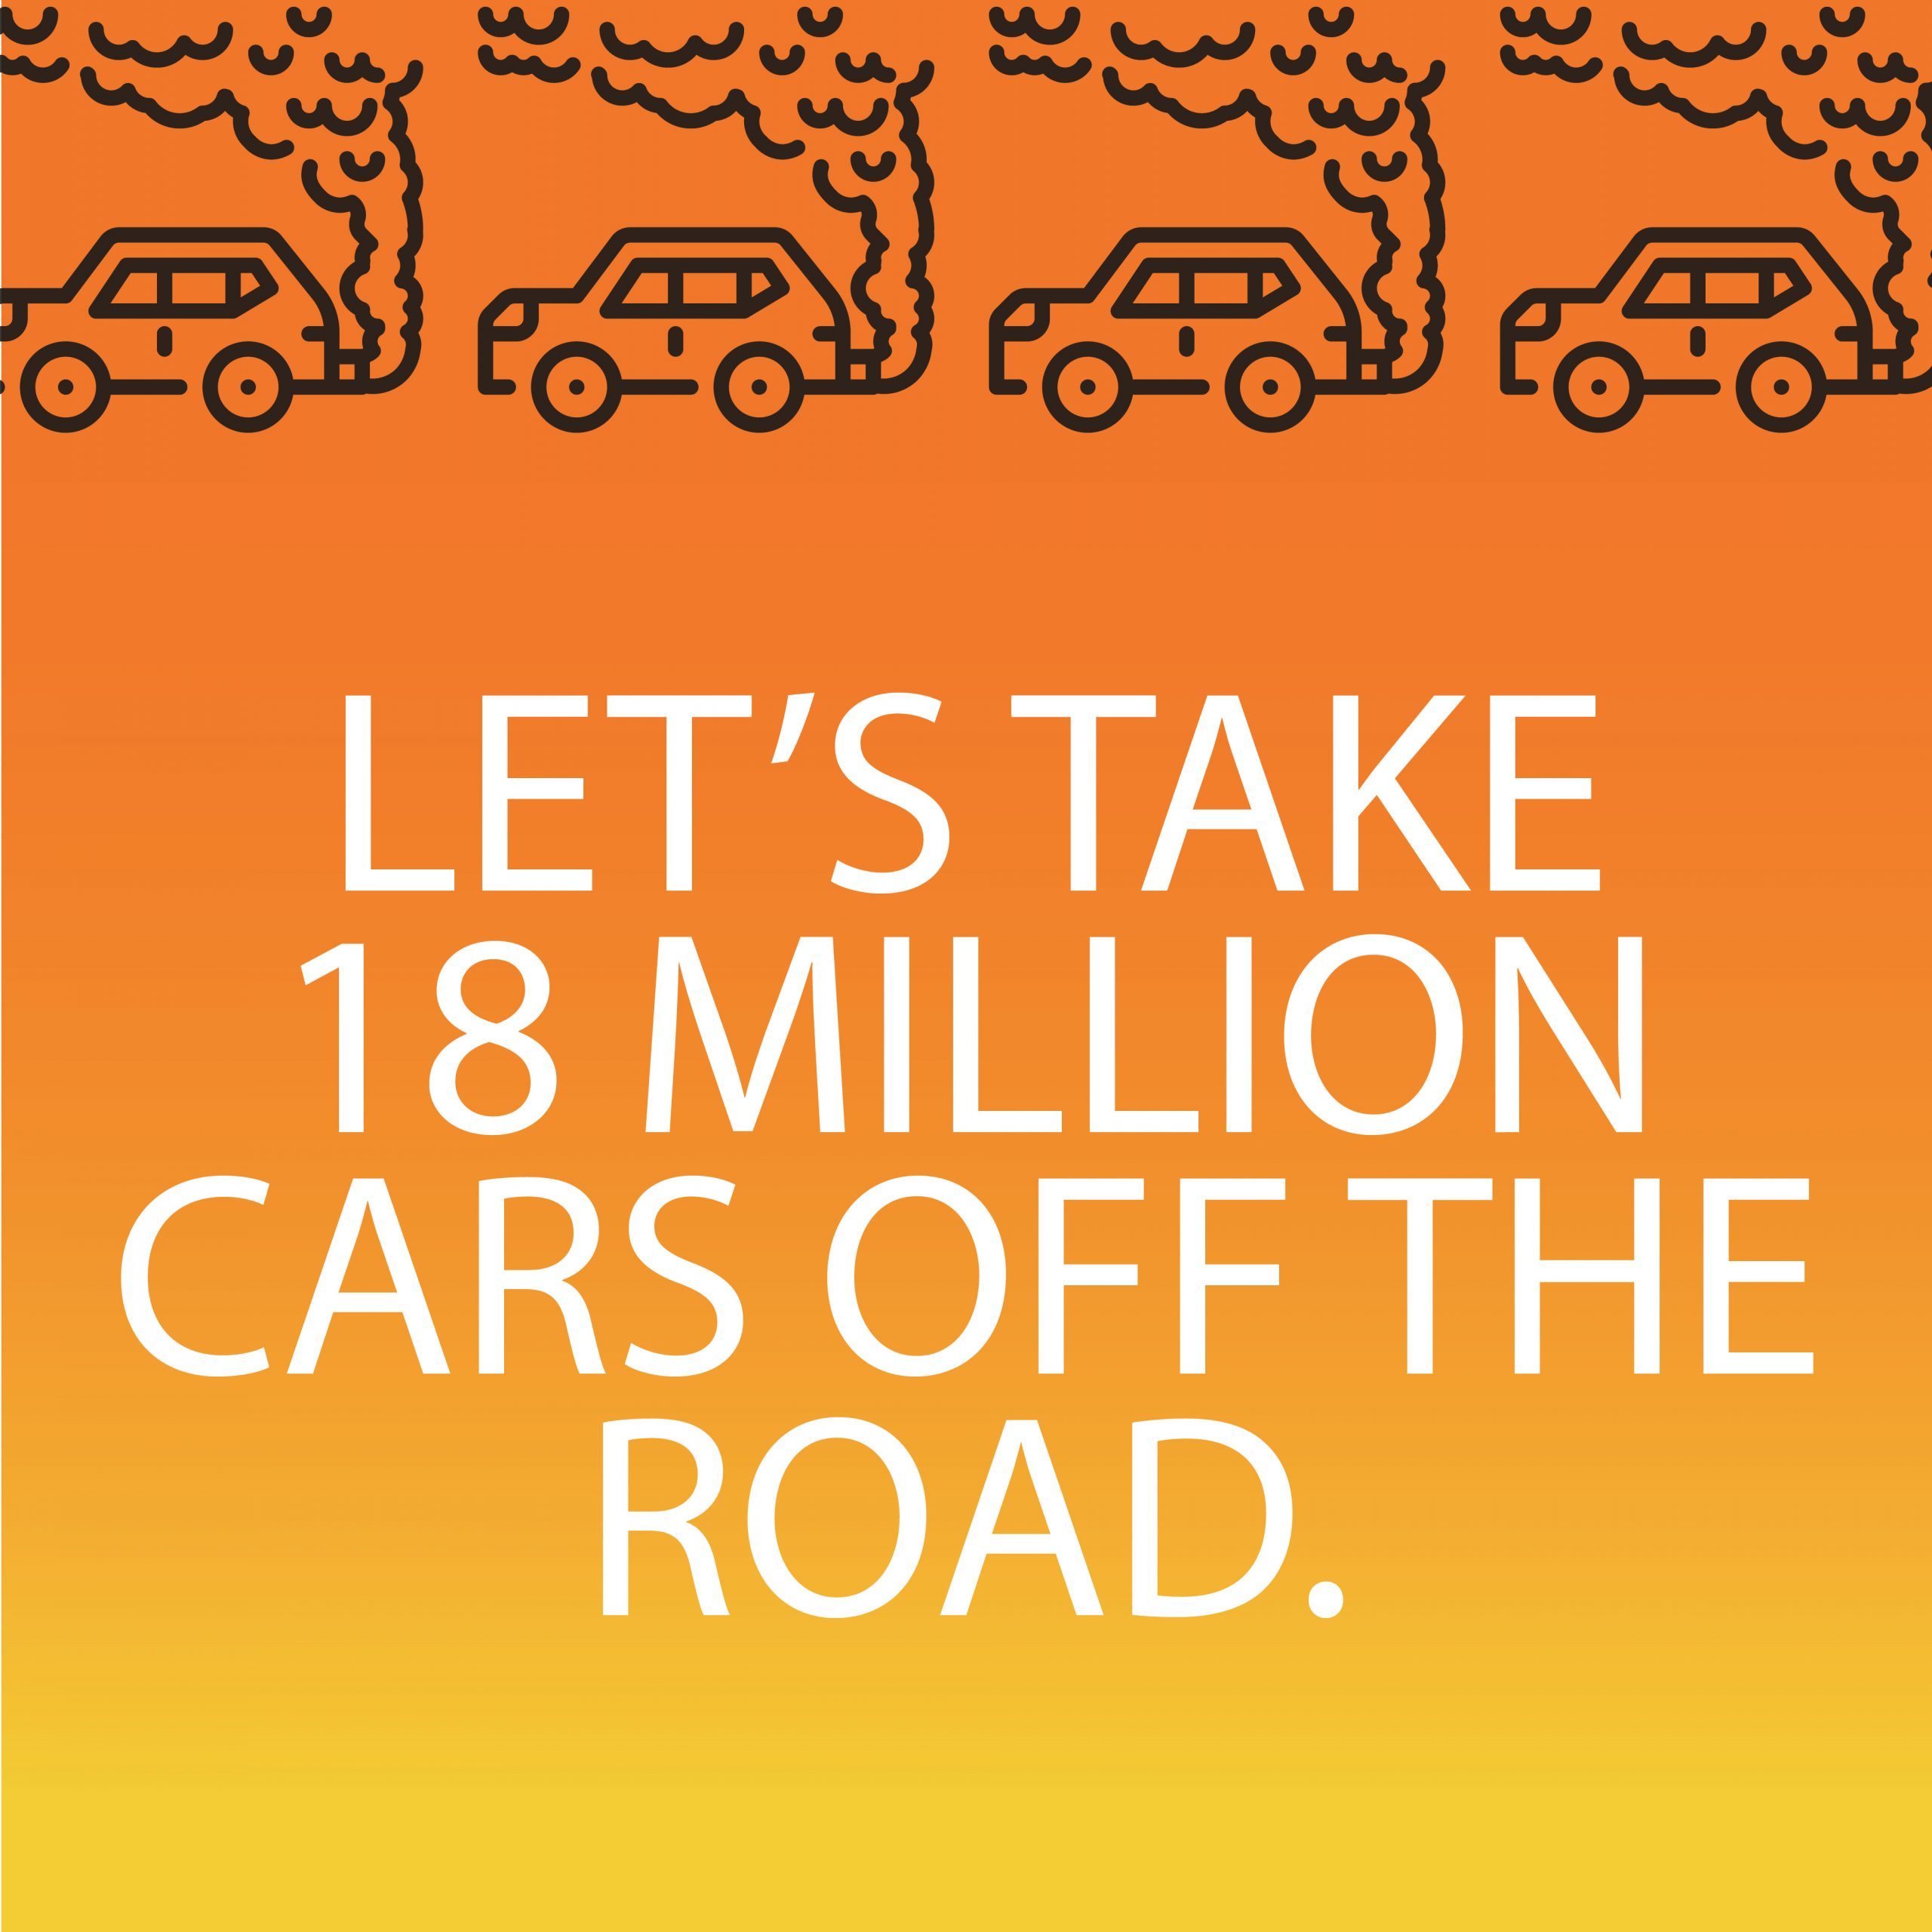 Shows polluting cars and says: let's take 18 million cars off the road